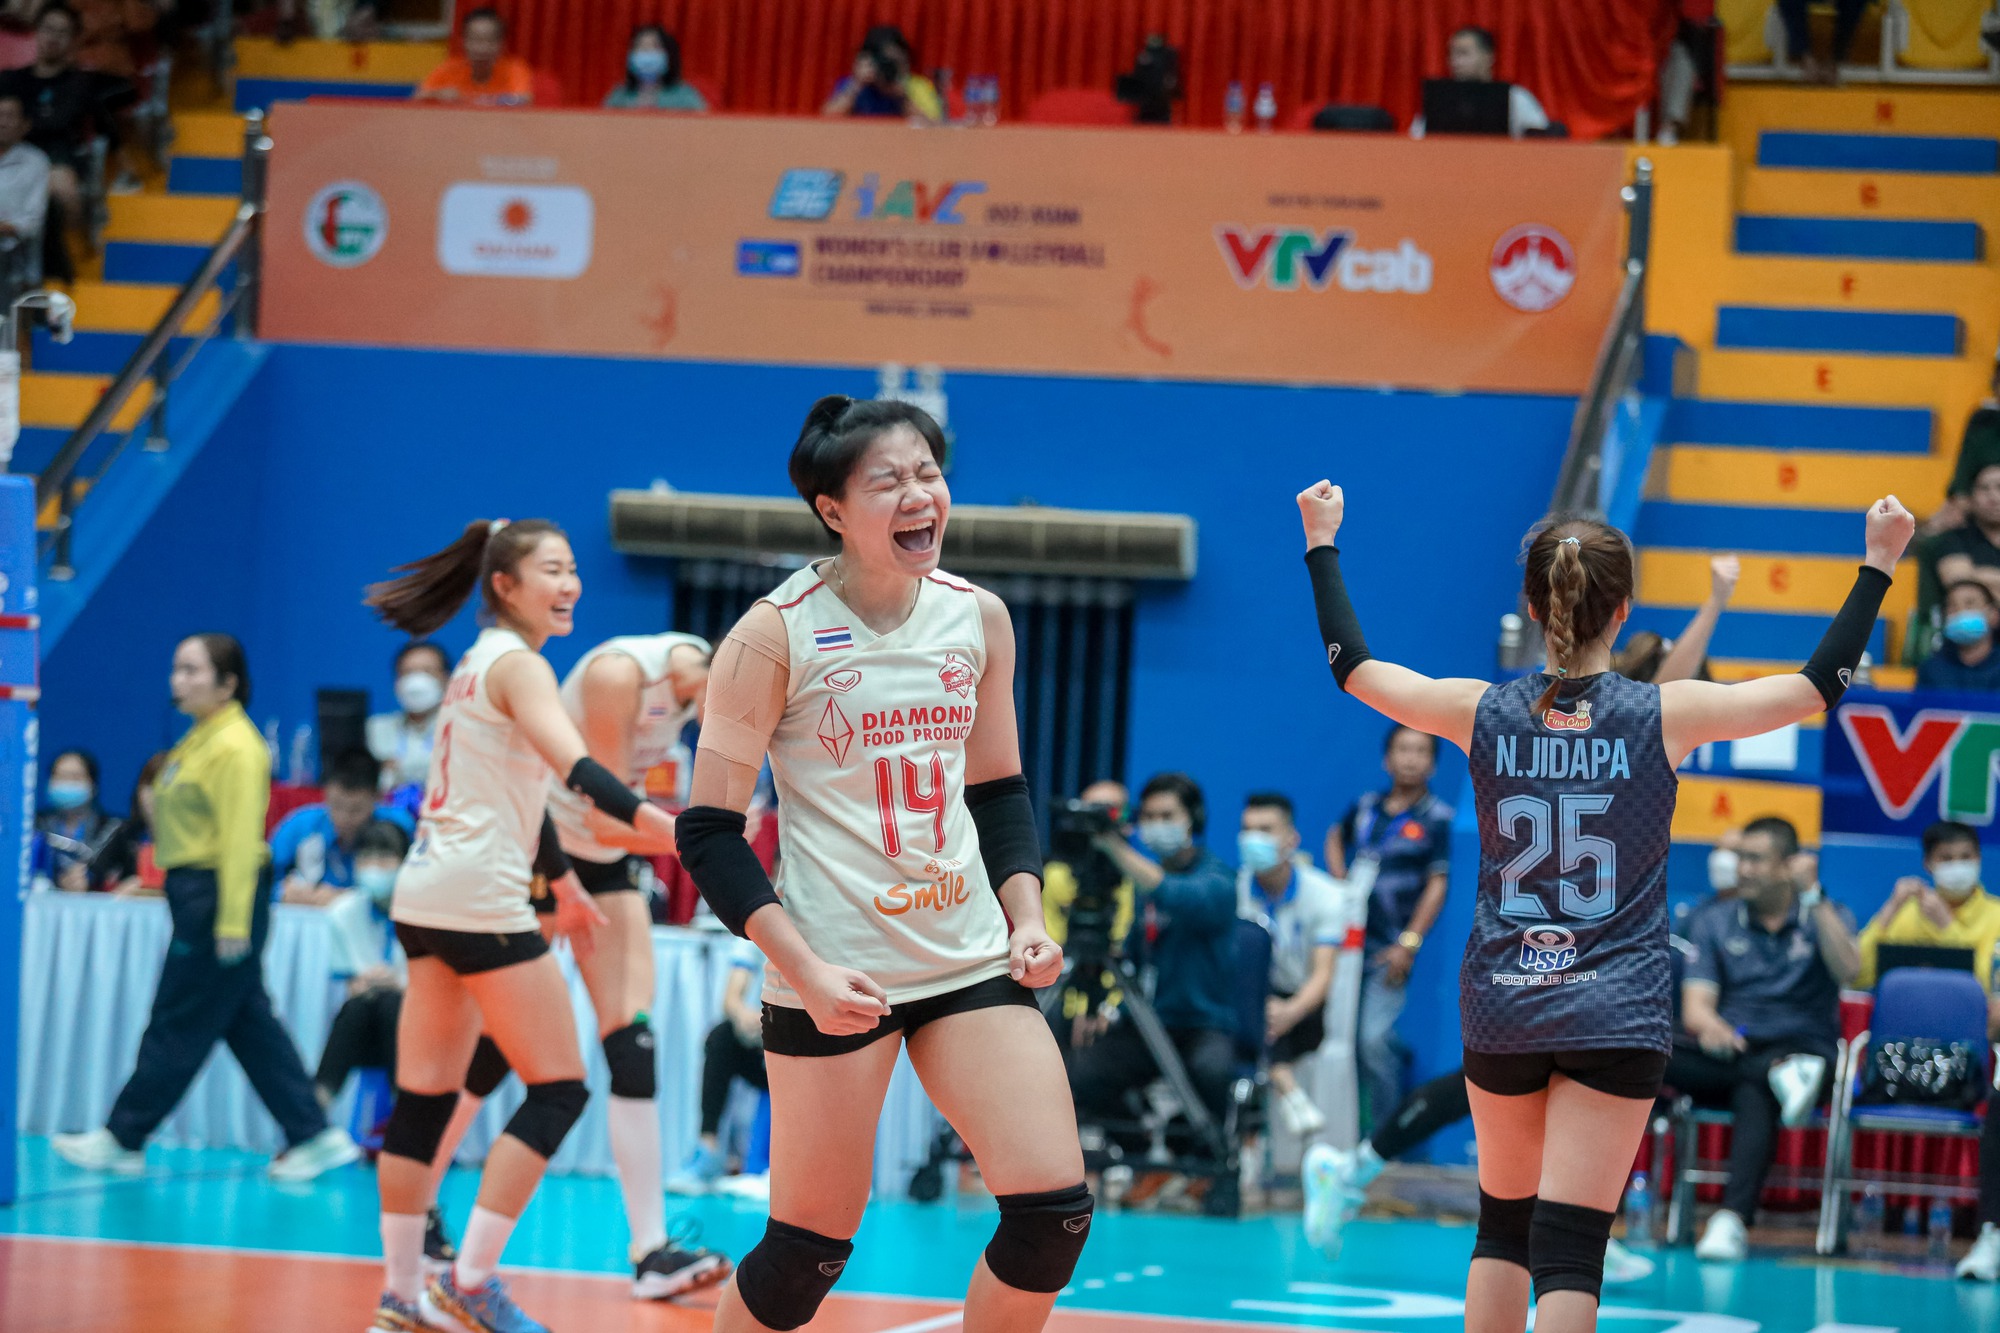 Link to watch the Asian Women’s Club Vietnam vs Thailand volleyball ...